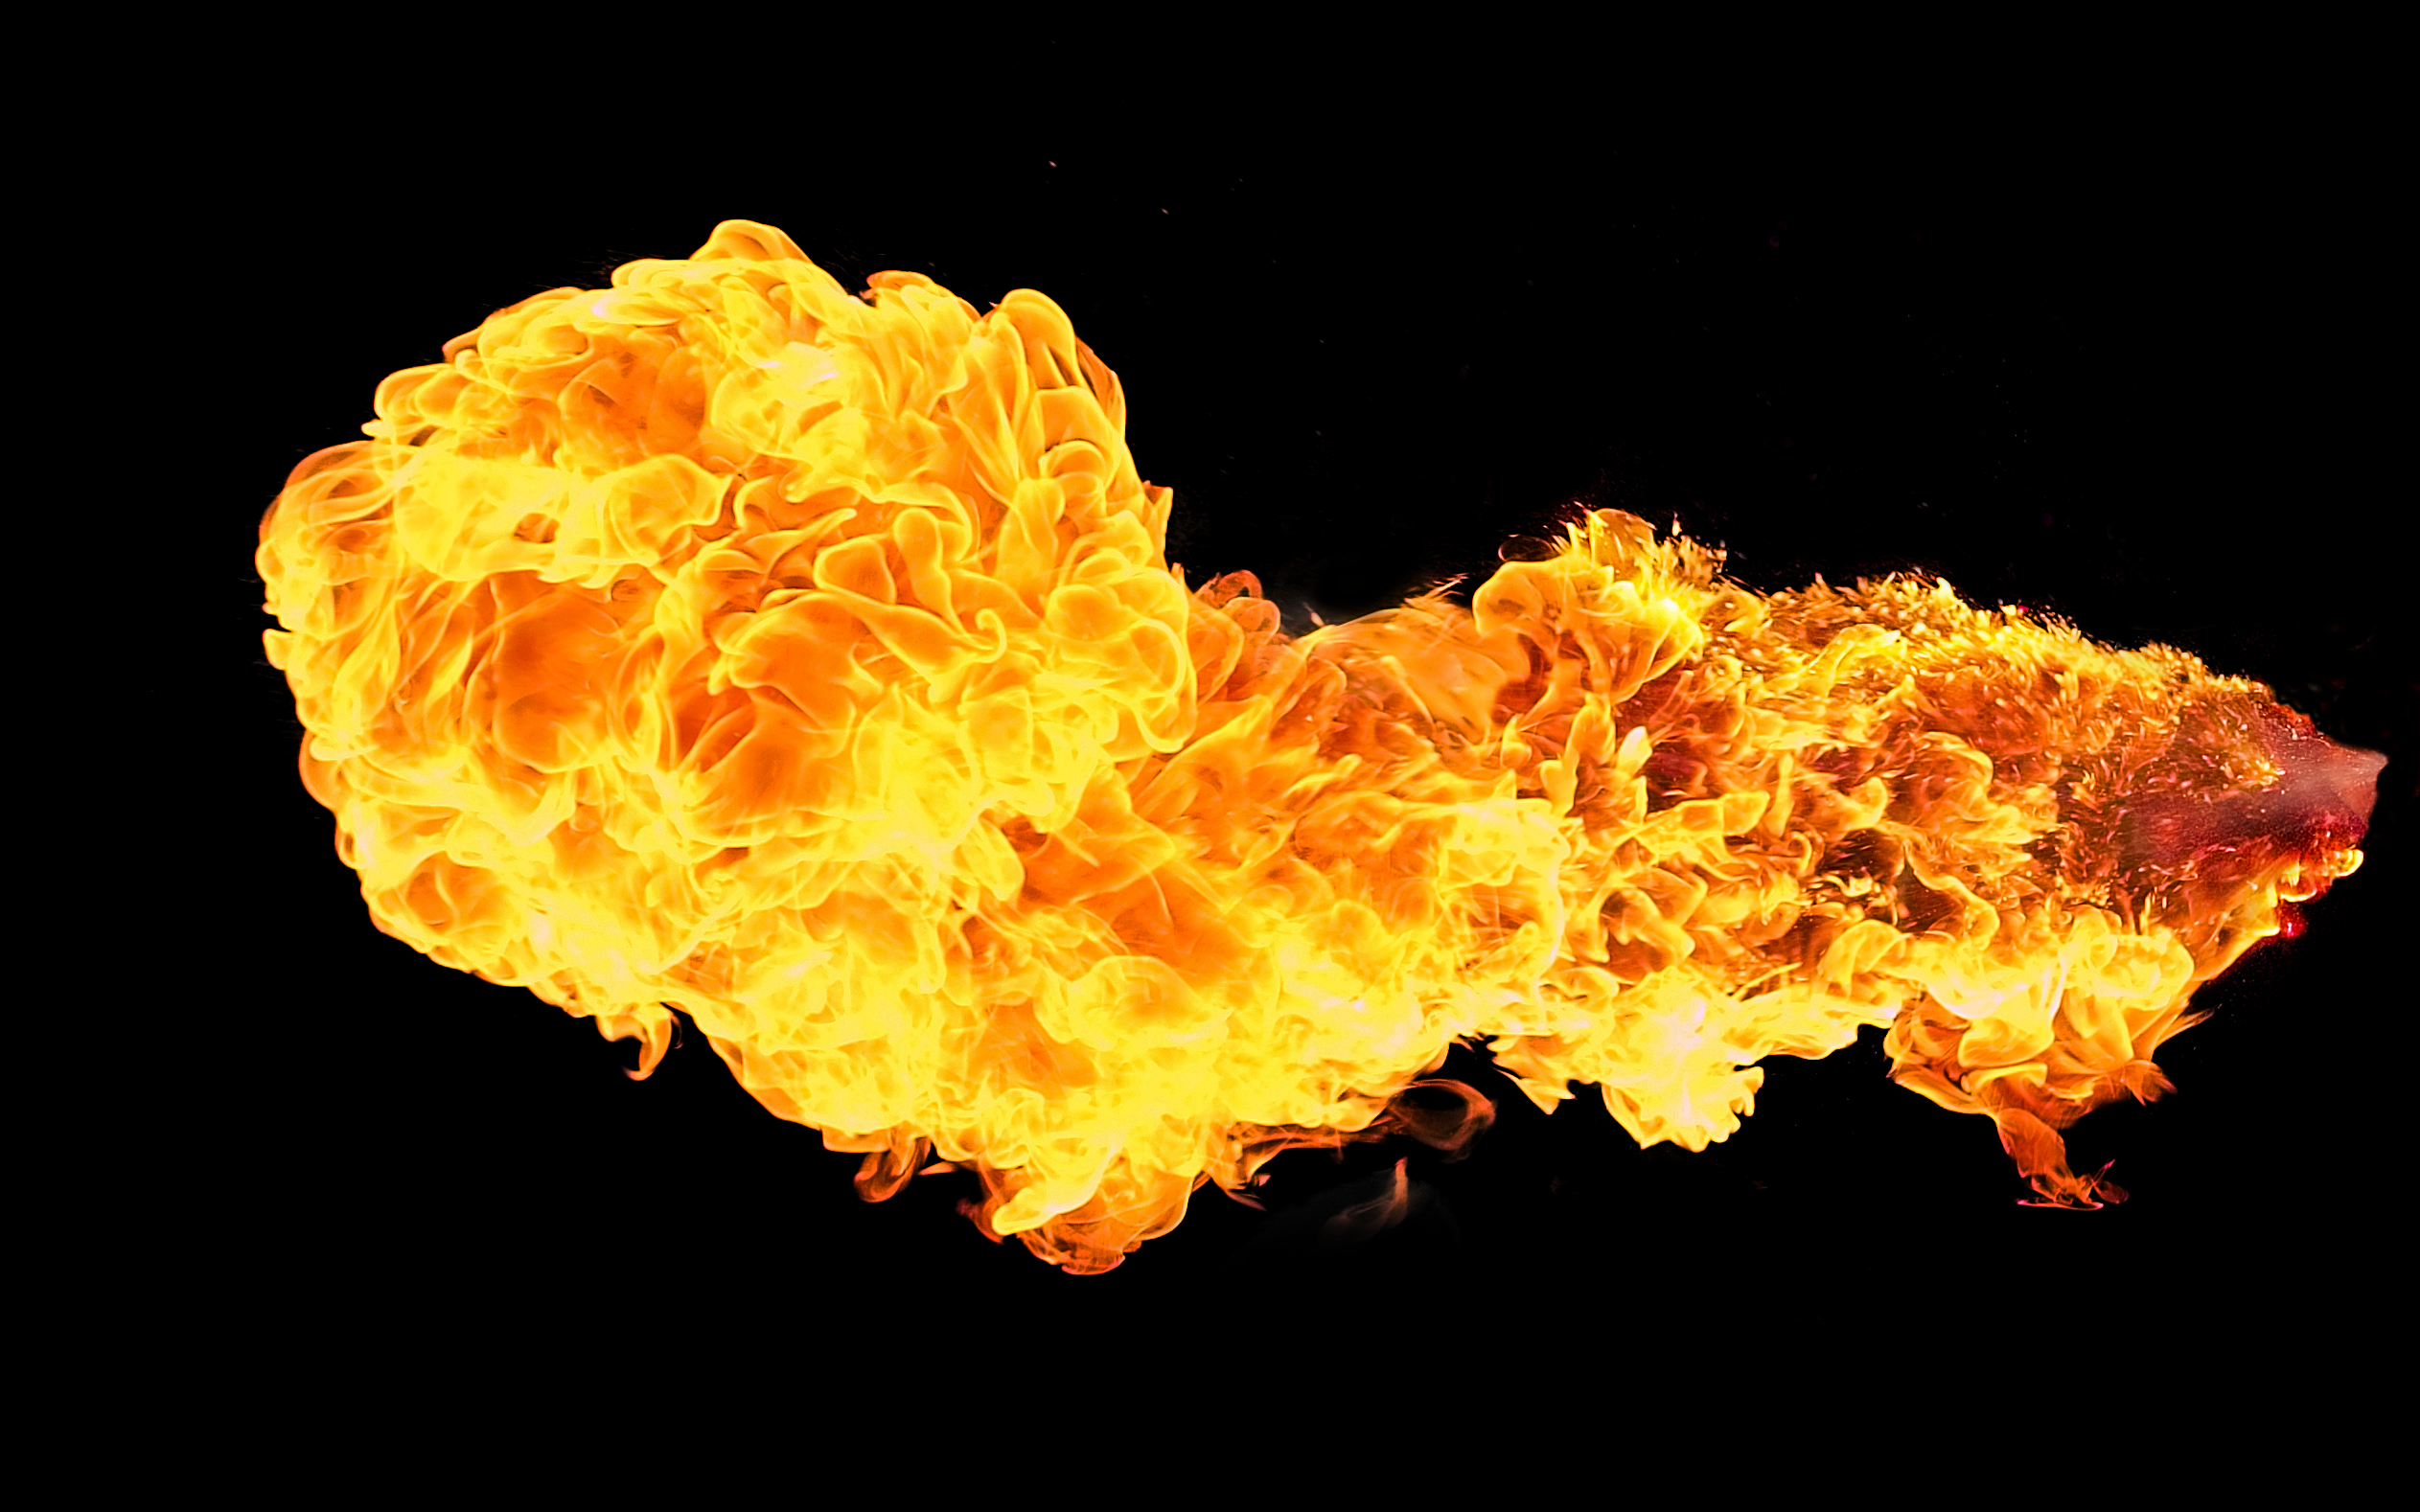 File:Flame of fire.jpg - Wikimedia Commons